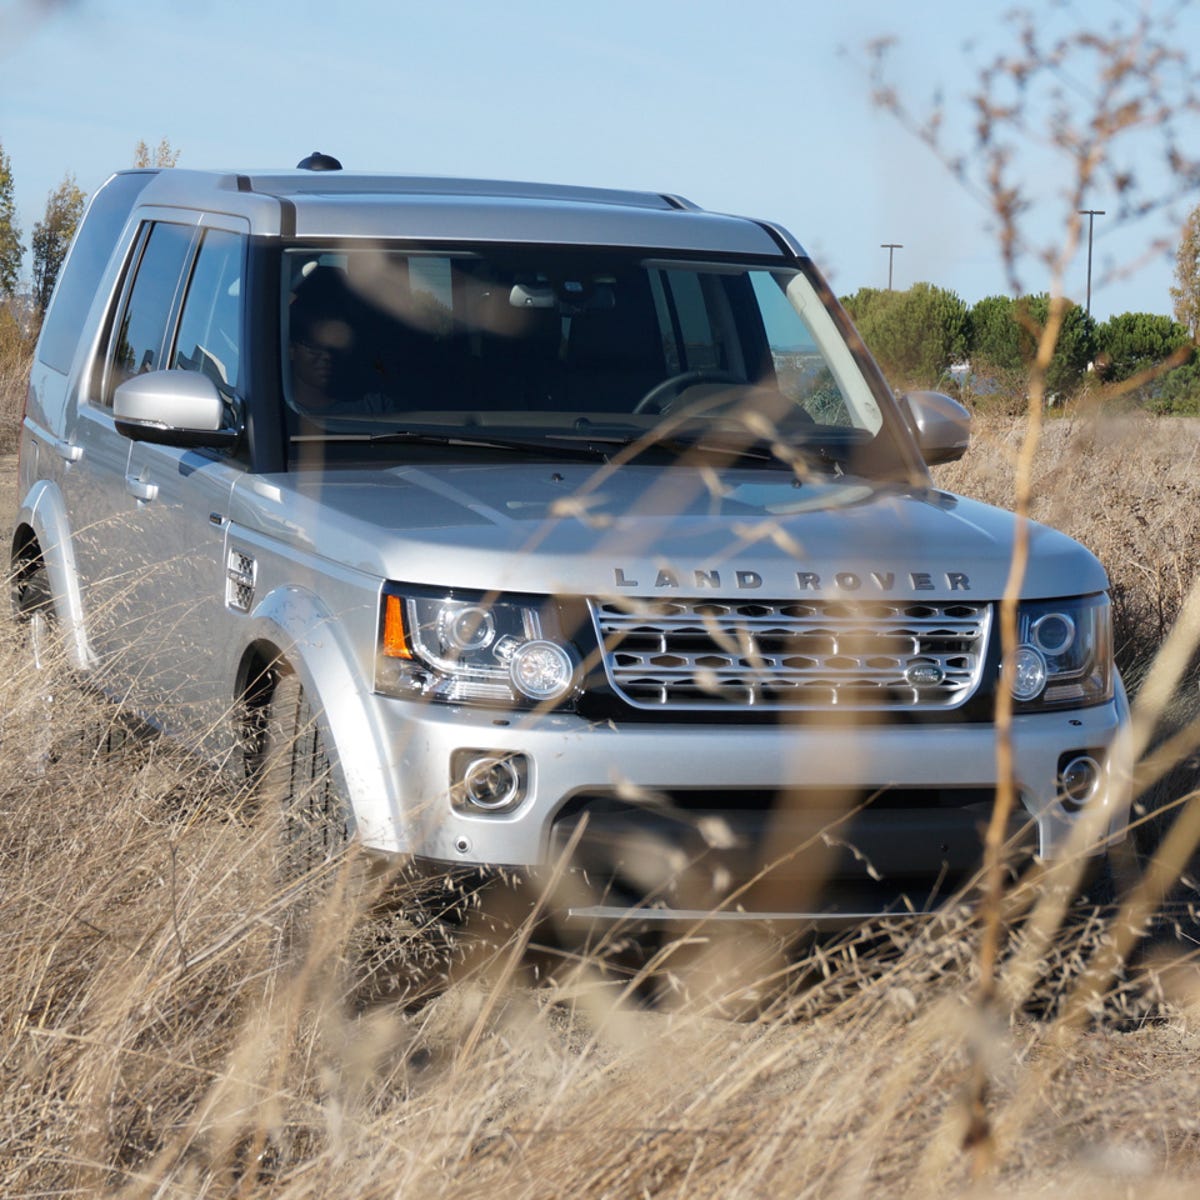 2014 Land Rover LR4 HSE review: Big, boxy LR4 blends old-school style with  a modern engine - CNET